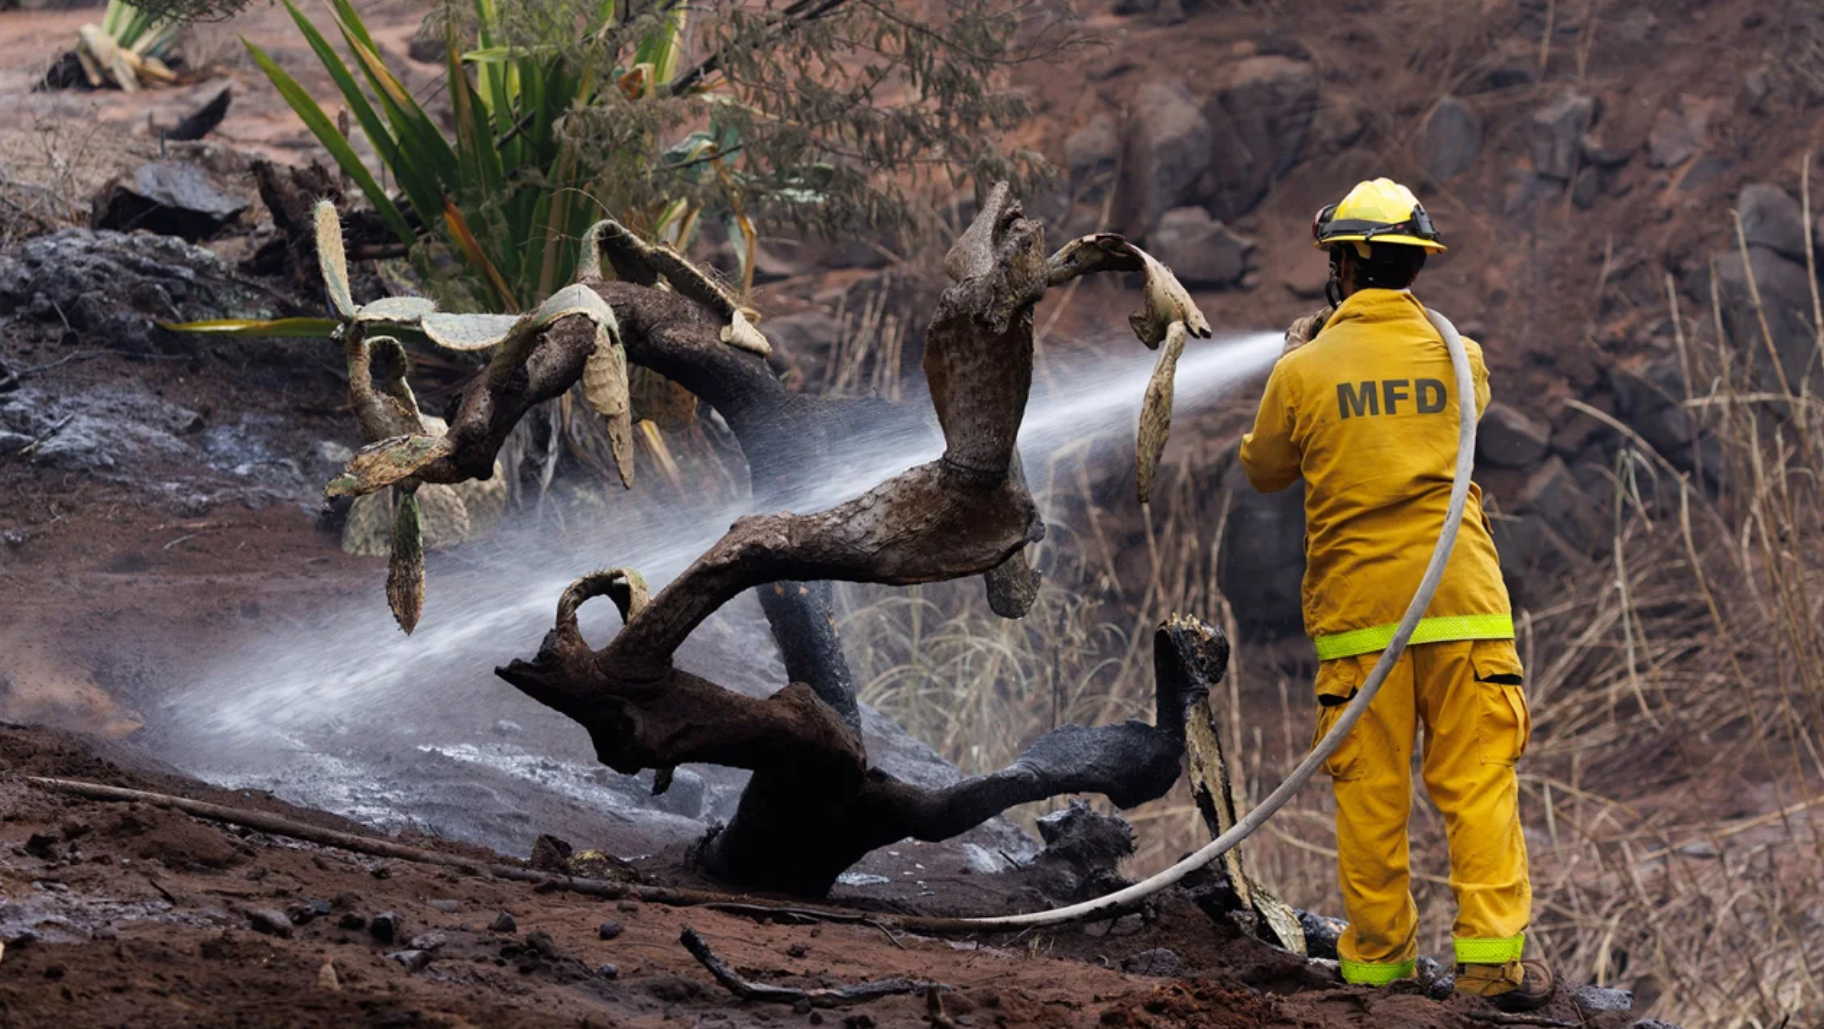 The death toll from the Maui wildfires stands at 93. Here’s what we know about the deadliest US fire in over a century